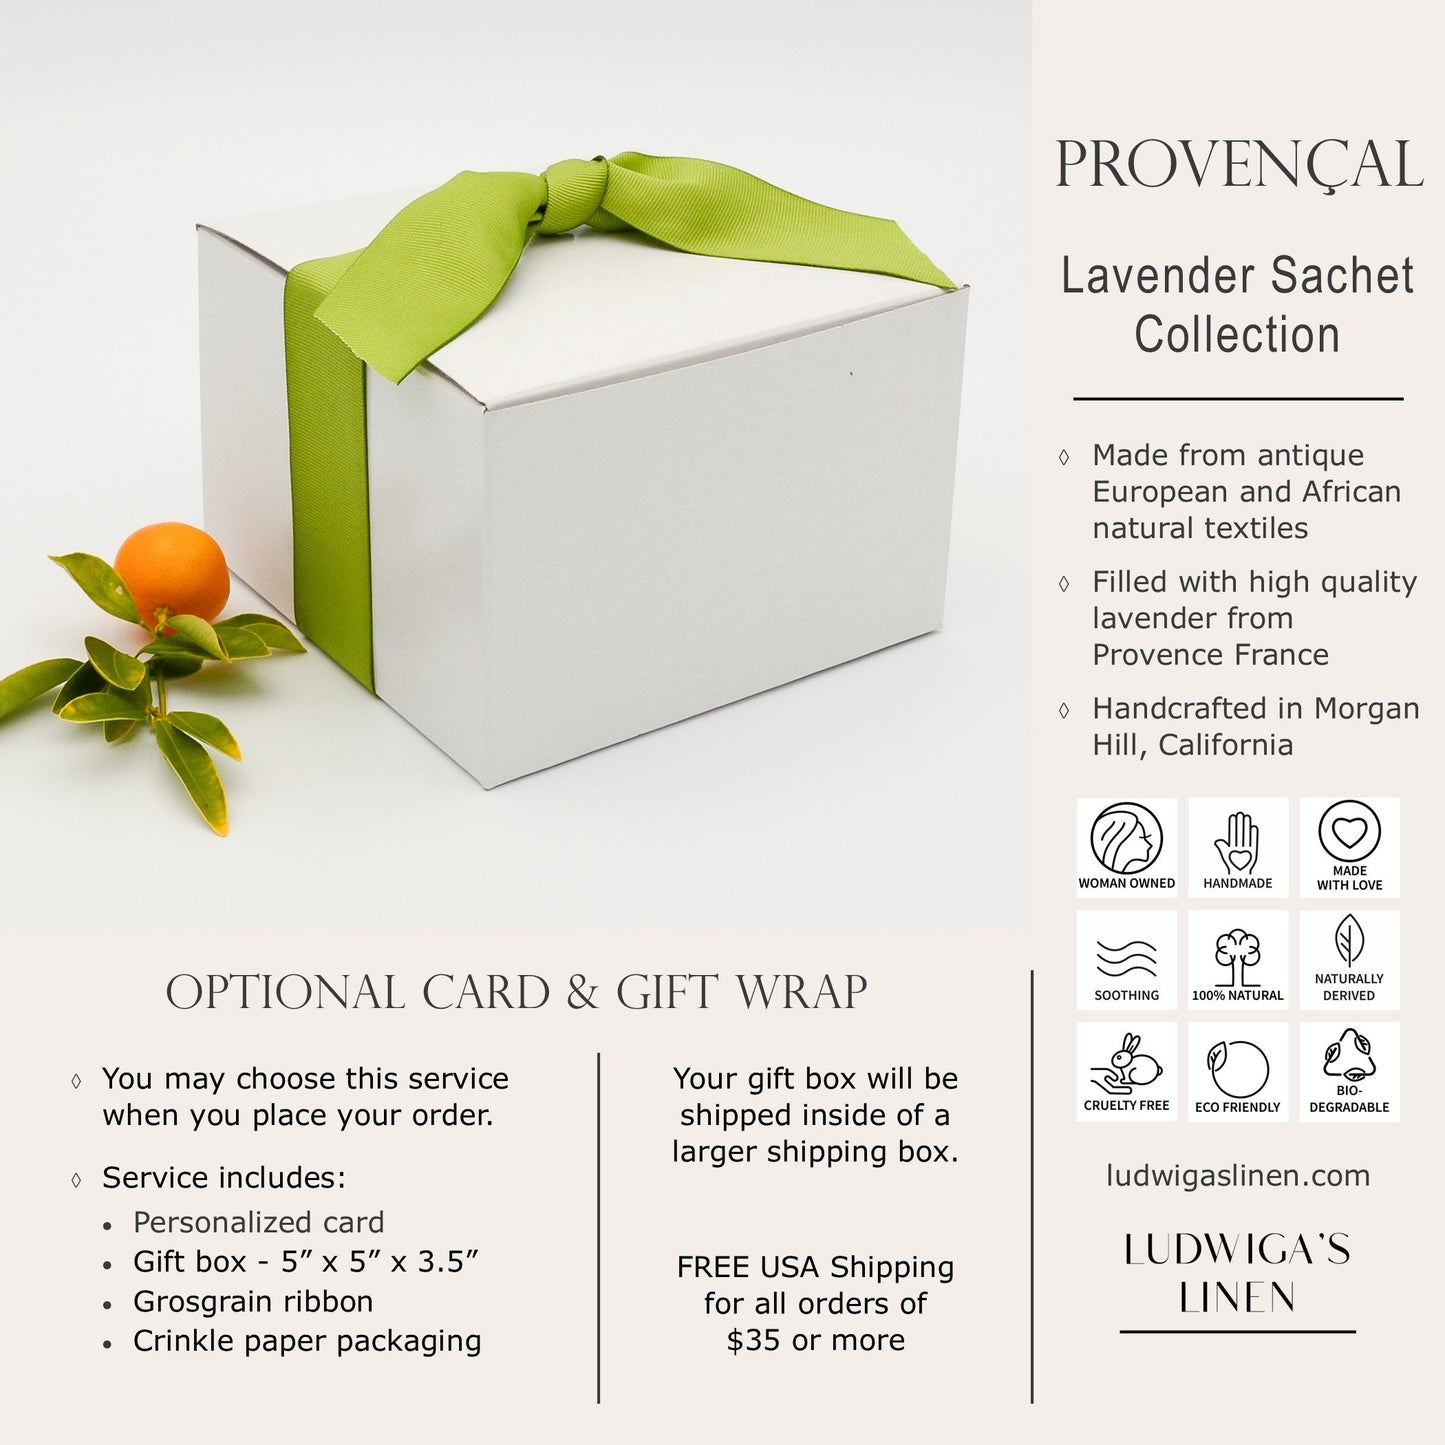 Optional gift box with green gros grain ribbon, information about Ludwiga's Linen Provençal sachet collection and shipping information